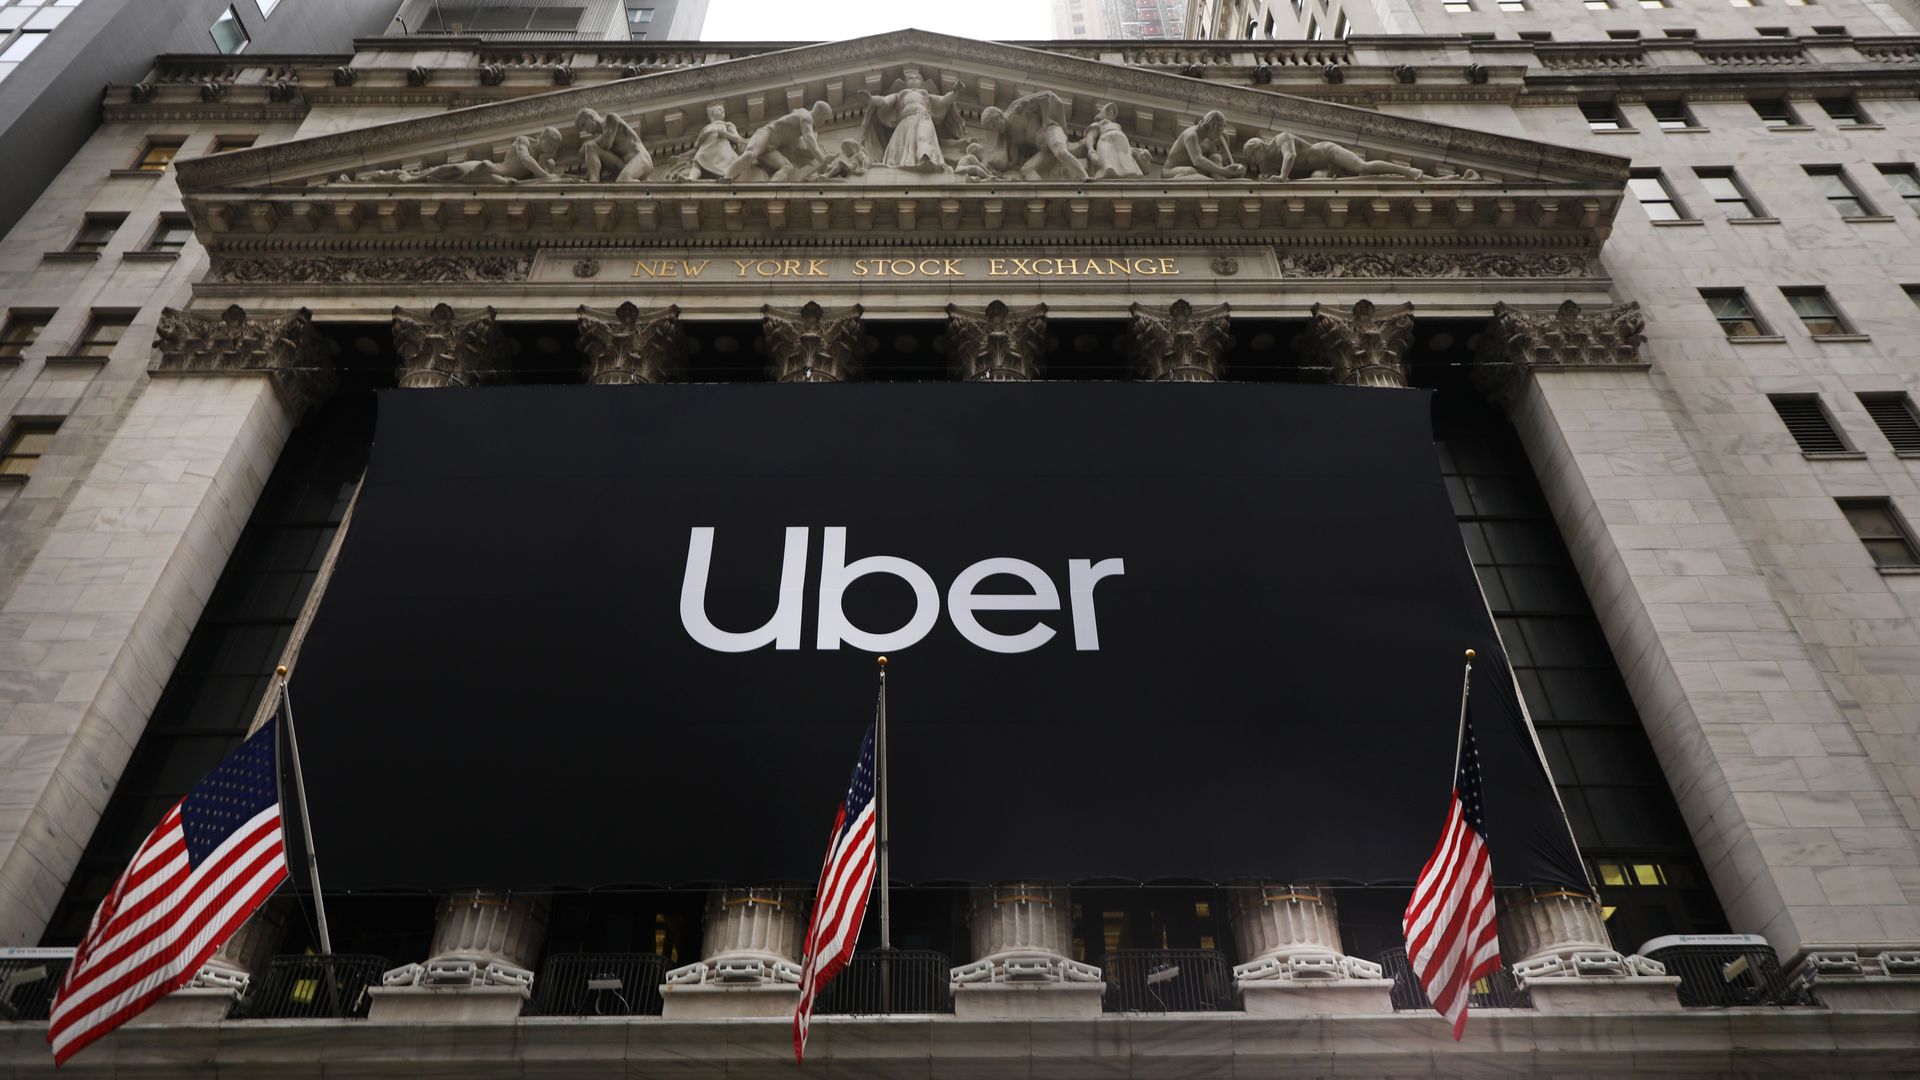 Uber banner in front of the new york stock exchange